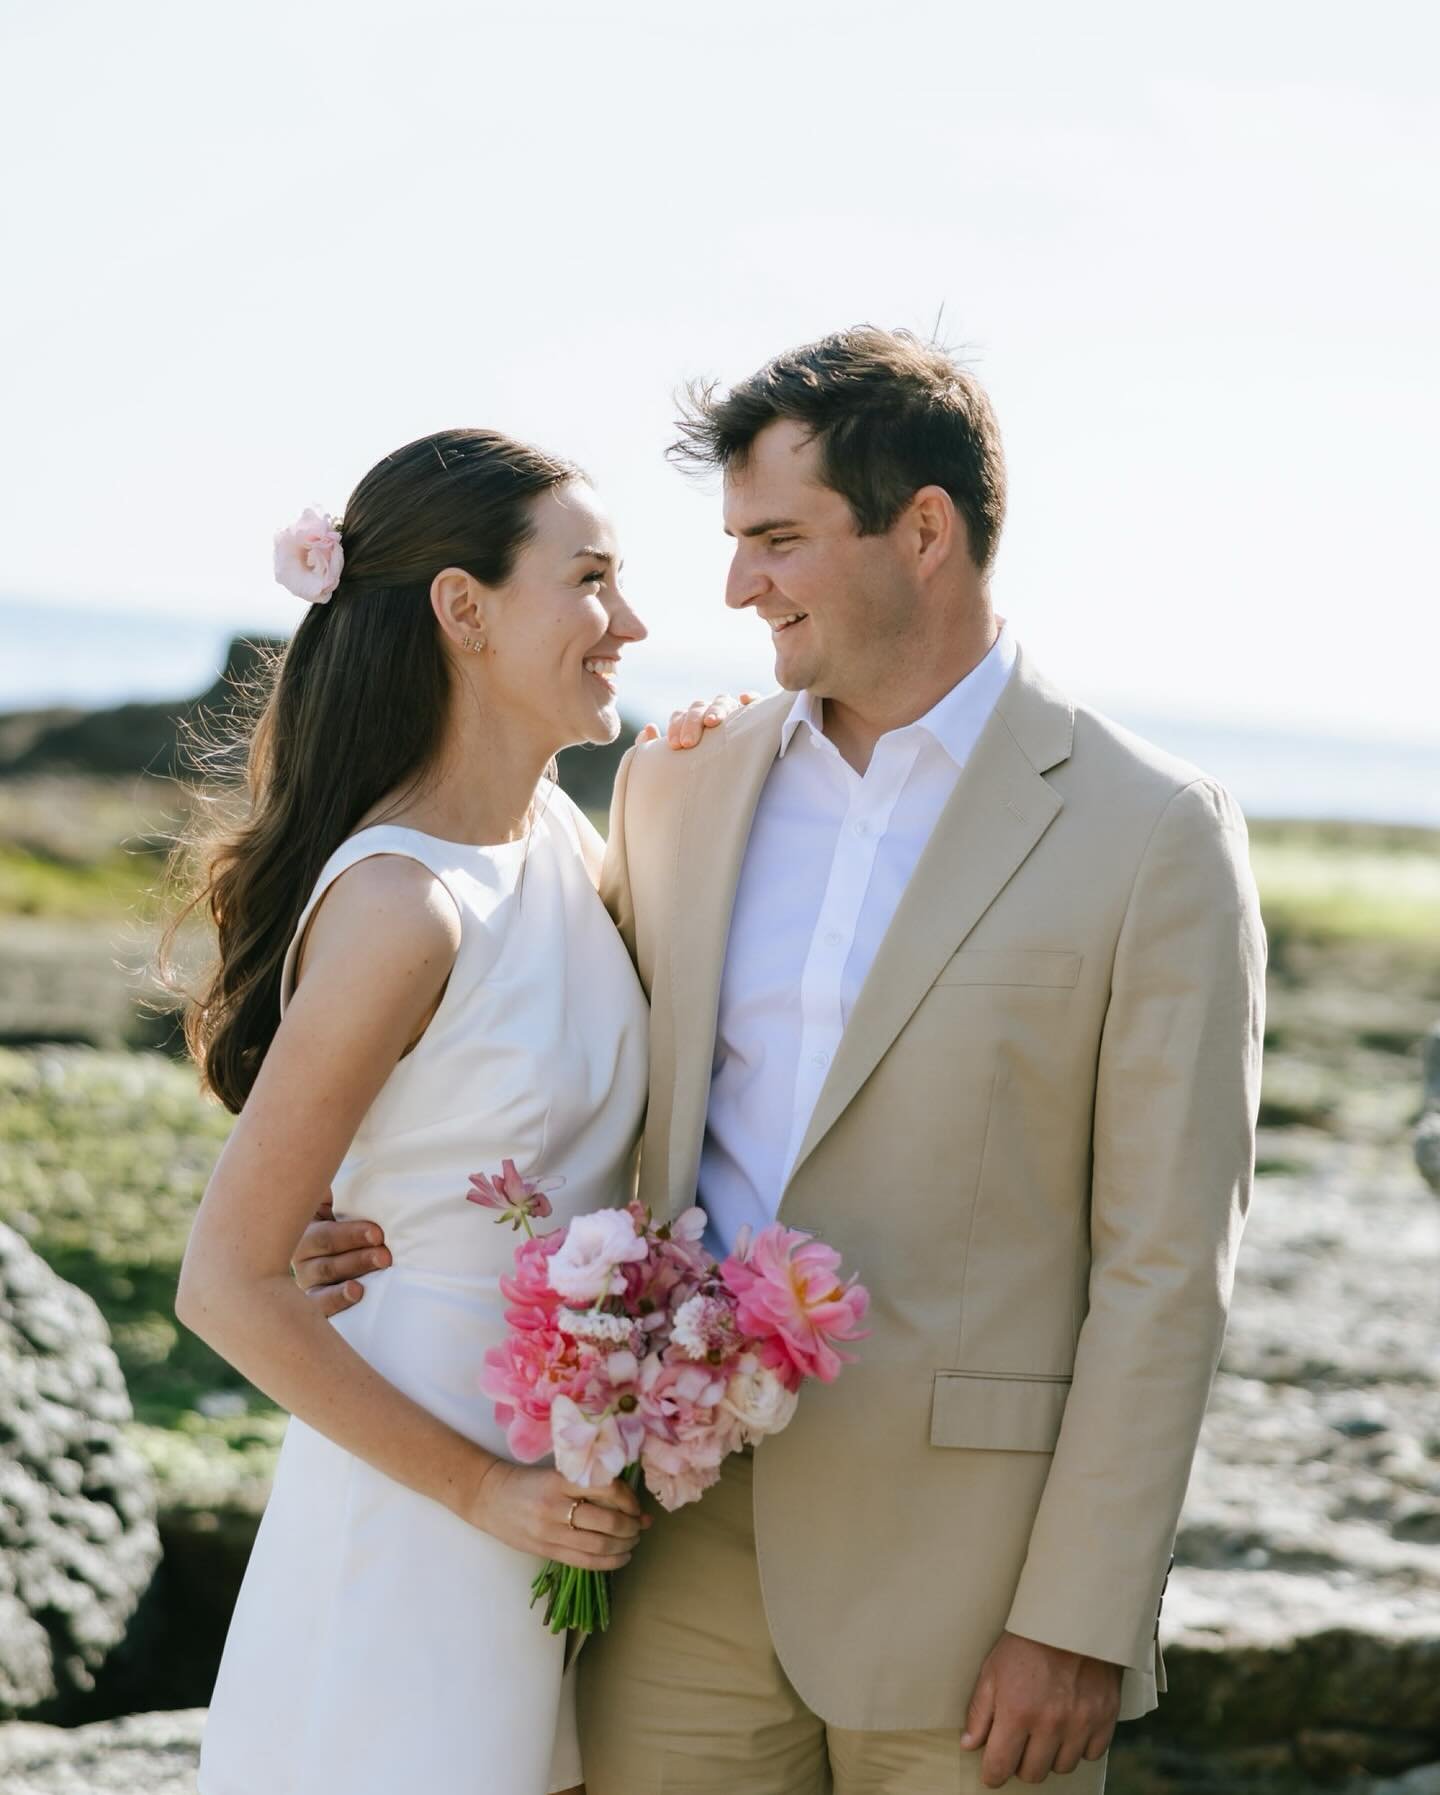 E + M&rsquo;s Laguna Beach Elopement 📸🤍 So honored to capture their intimate civil ceremony with their immediate family followed by portraits on the beach xx 

#lagunabeachwedding #lagunabeachweddingphotographer #orangecountyweddingphotographer #ca